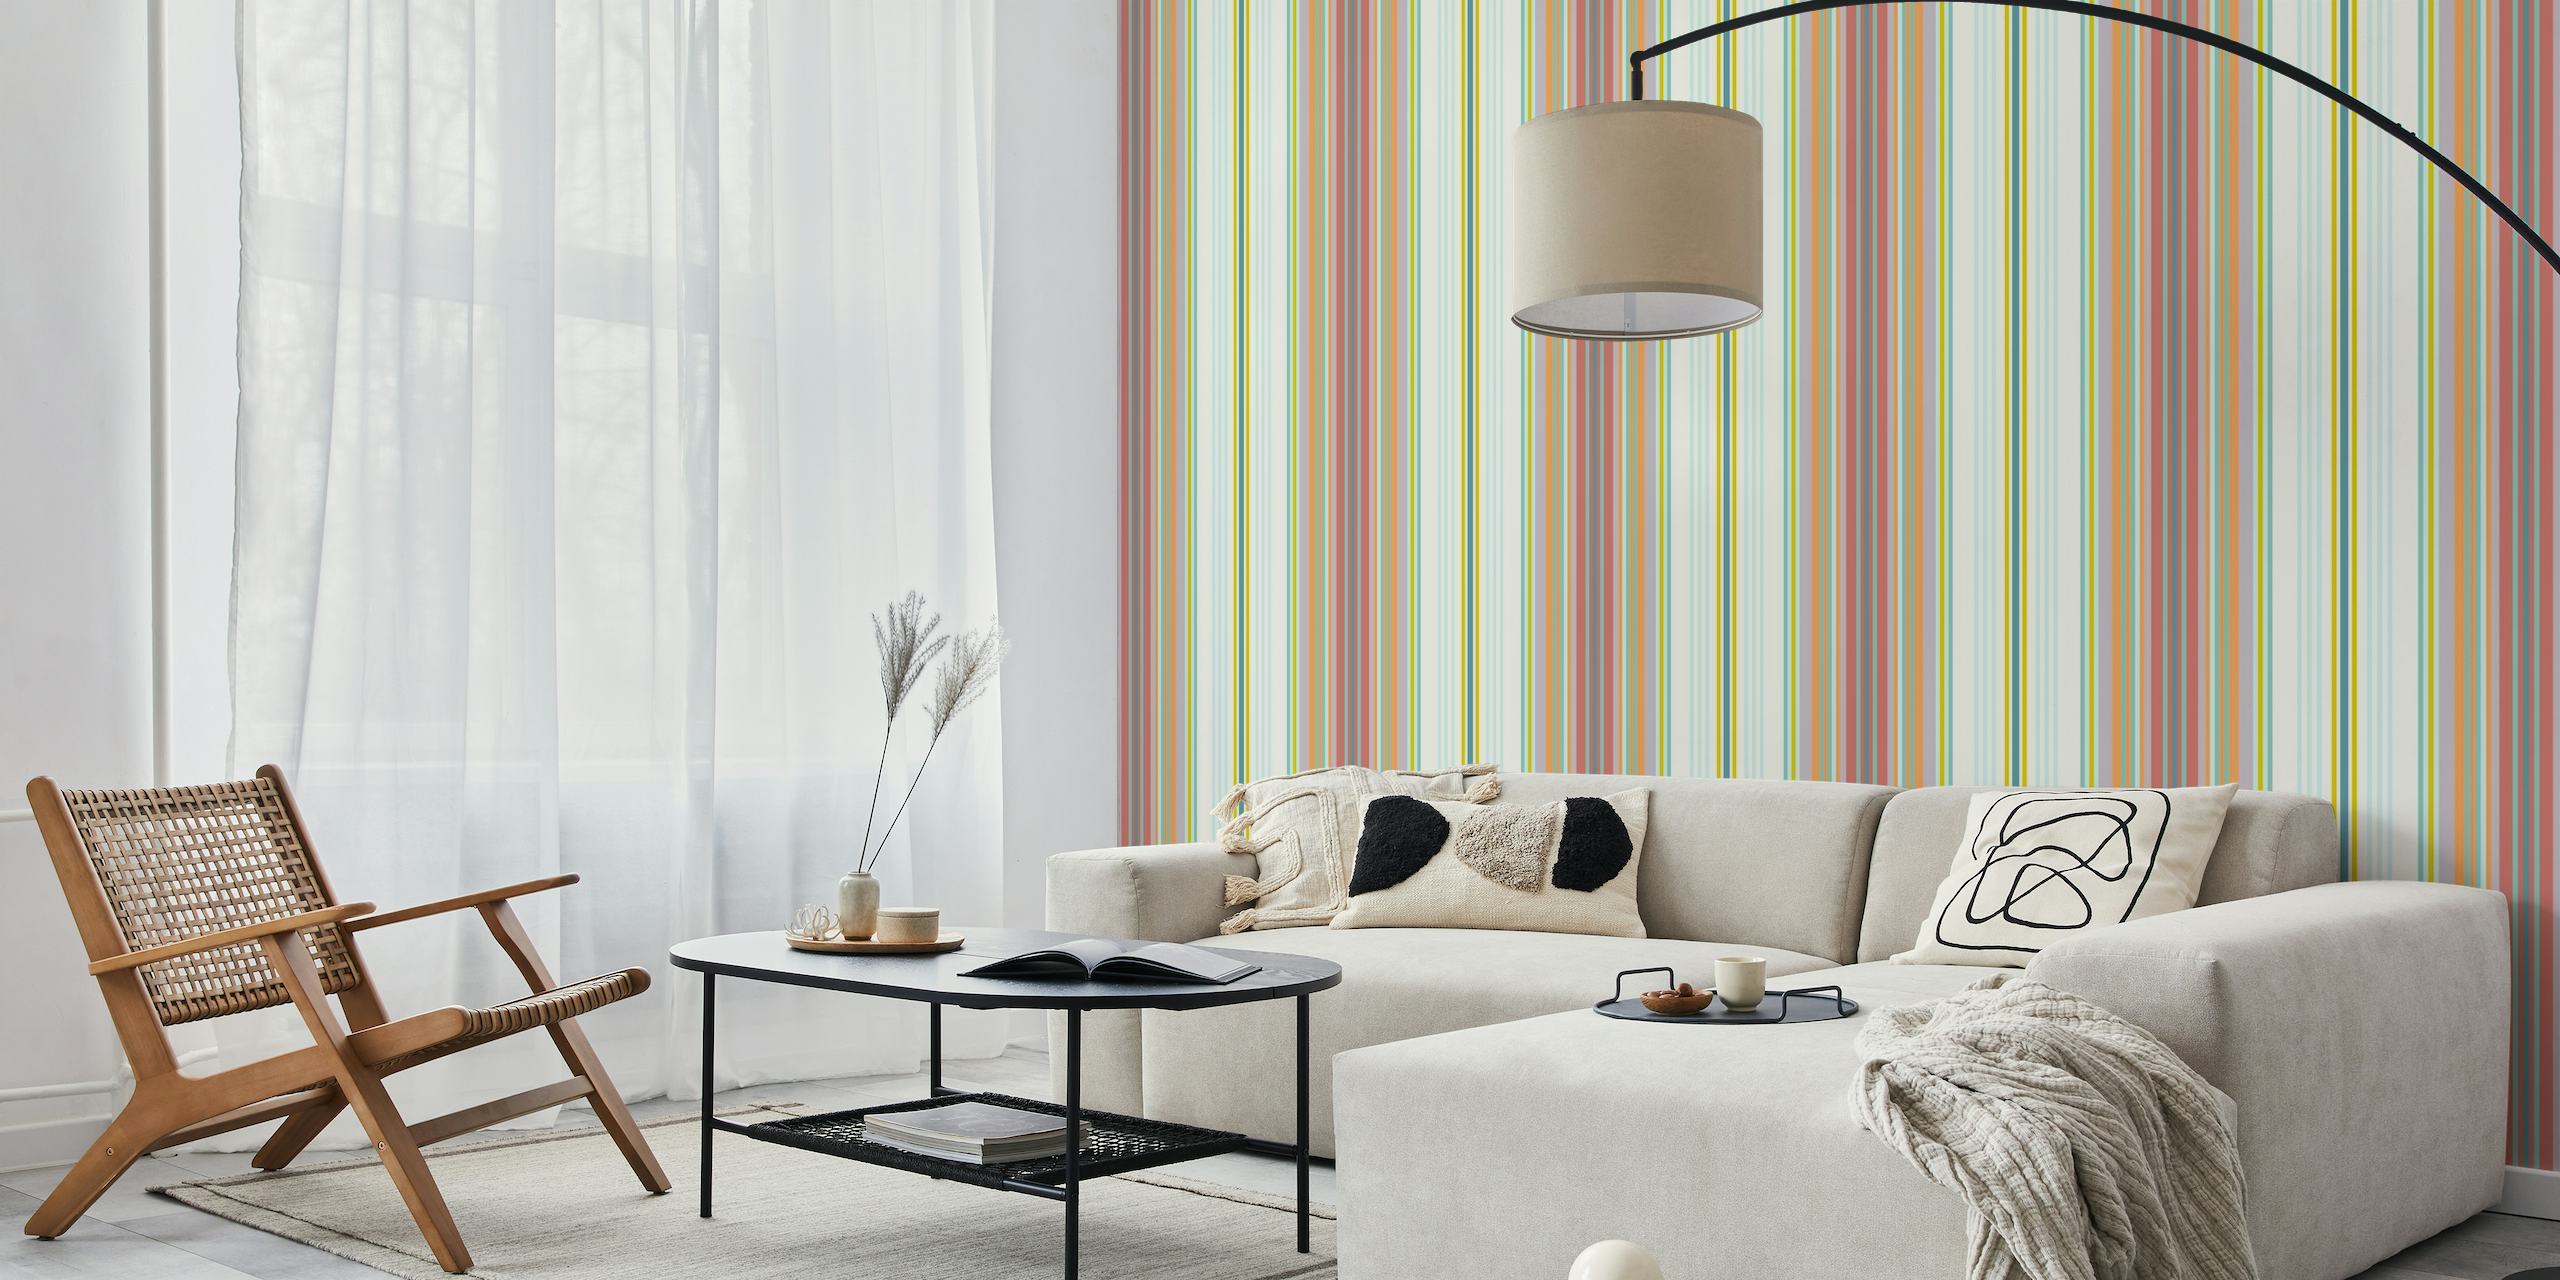 Retro-inspired 70s Striped Wallpaper in Blue, with mustard and neutral tones, depicting the spirit of the 1970s.